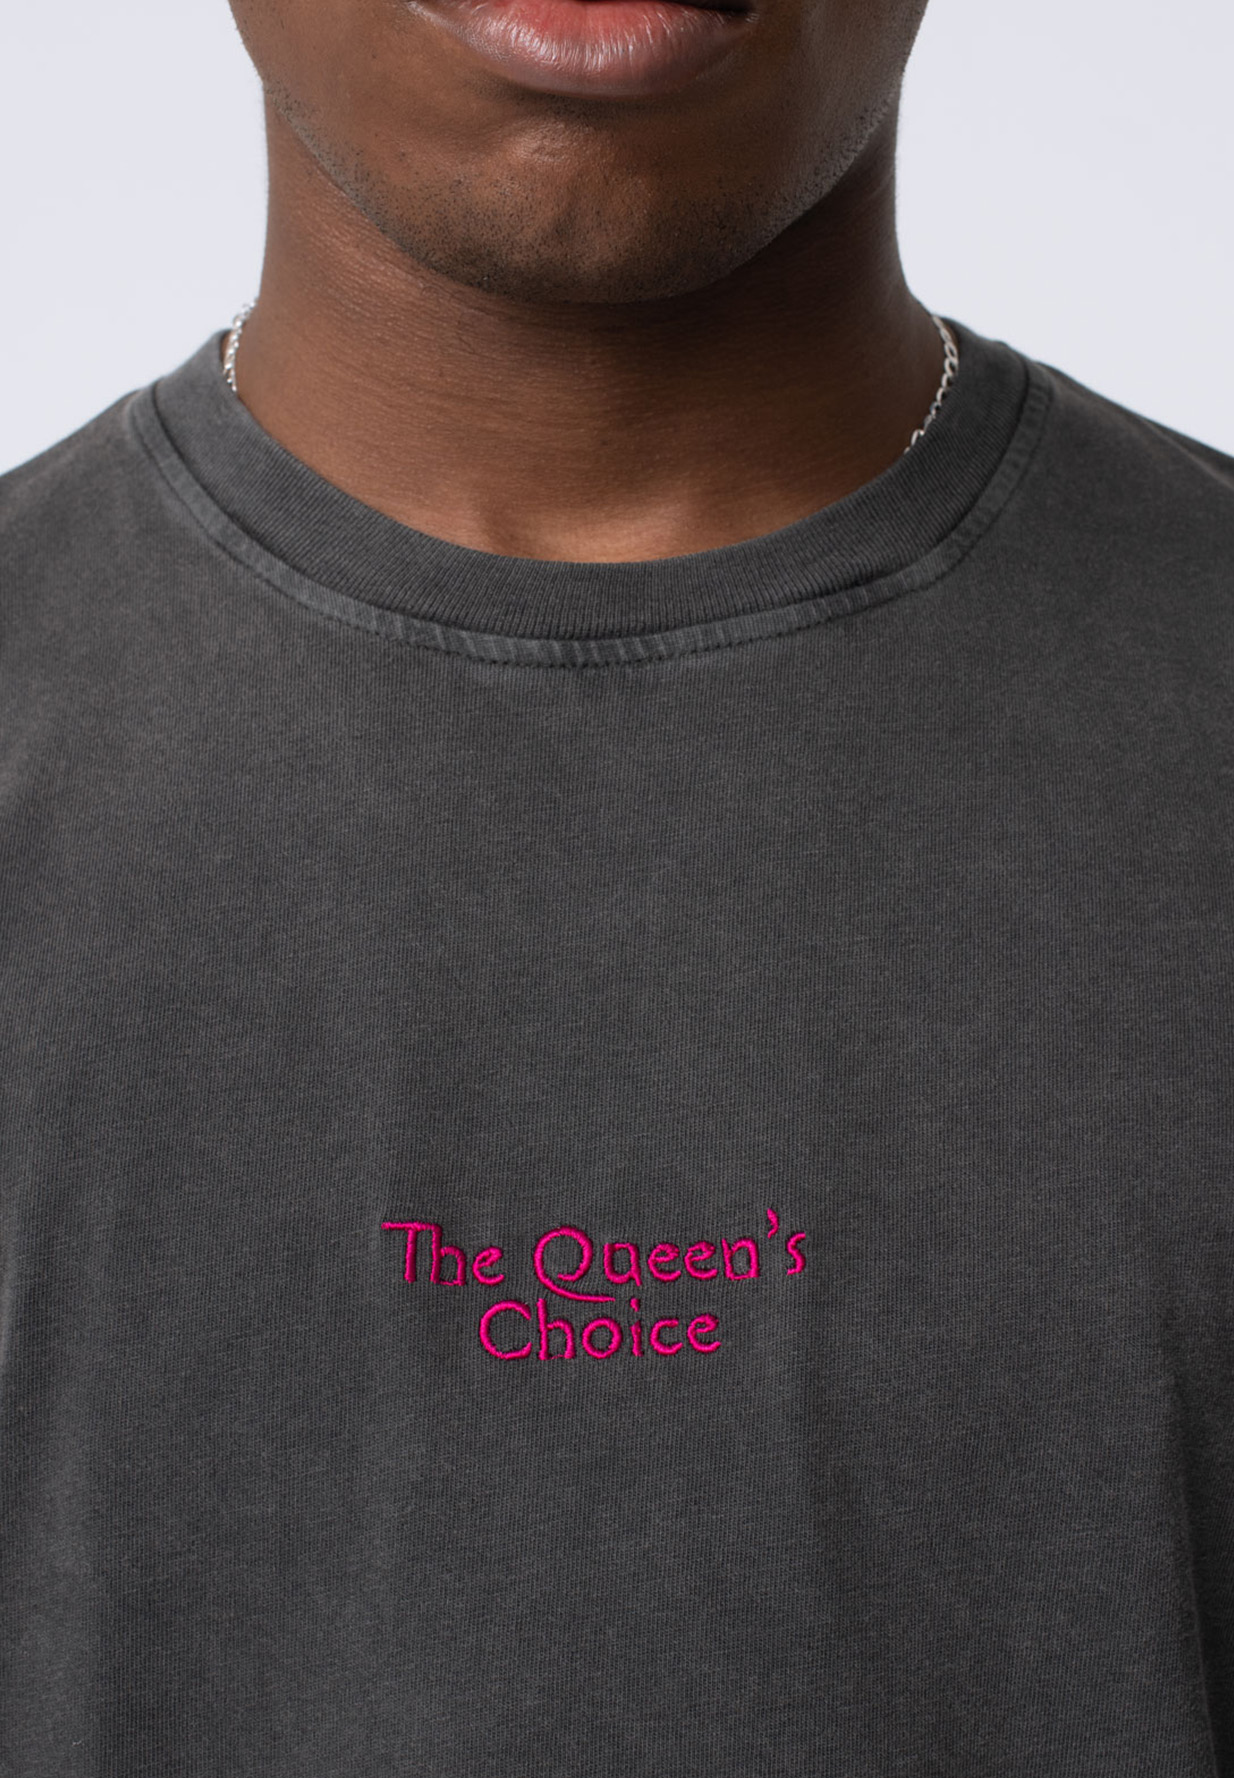 Carne Bollente T Shirt The Queens Choice Washed Black Xs Xs Washed Black 112561 